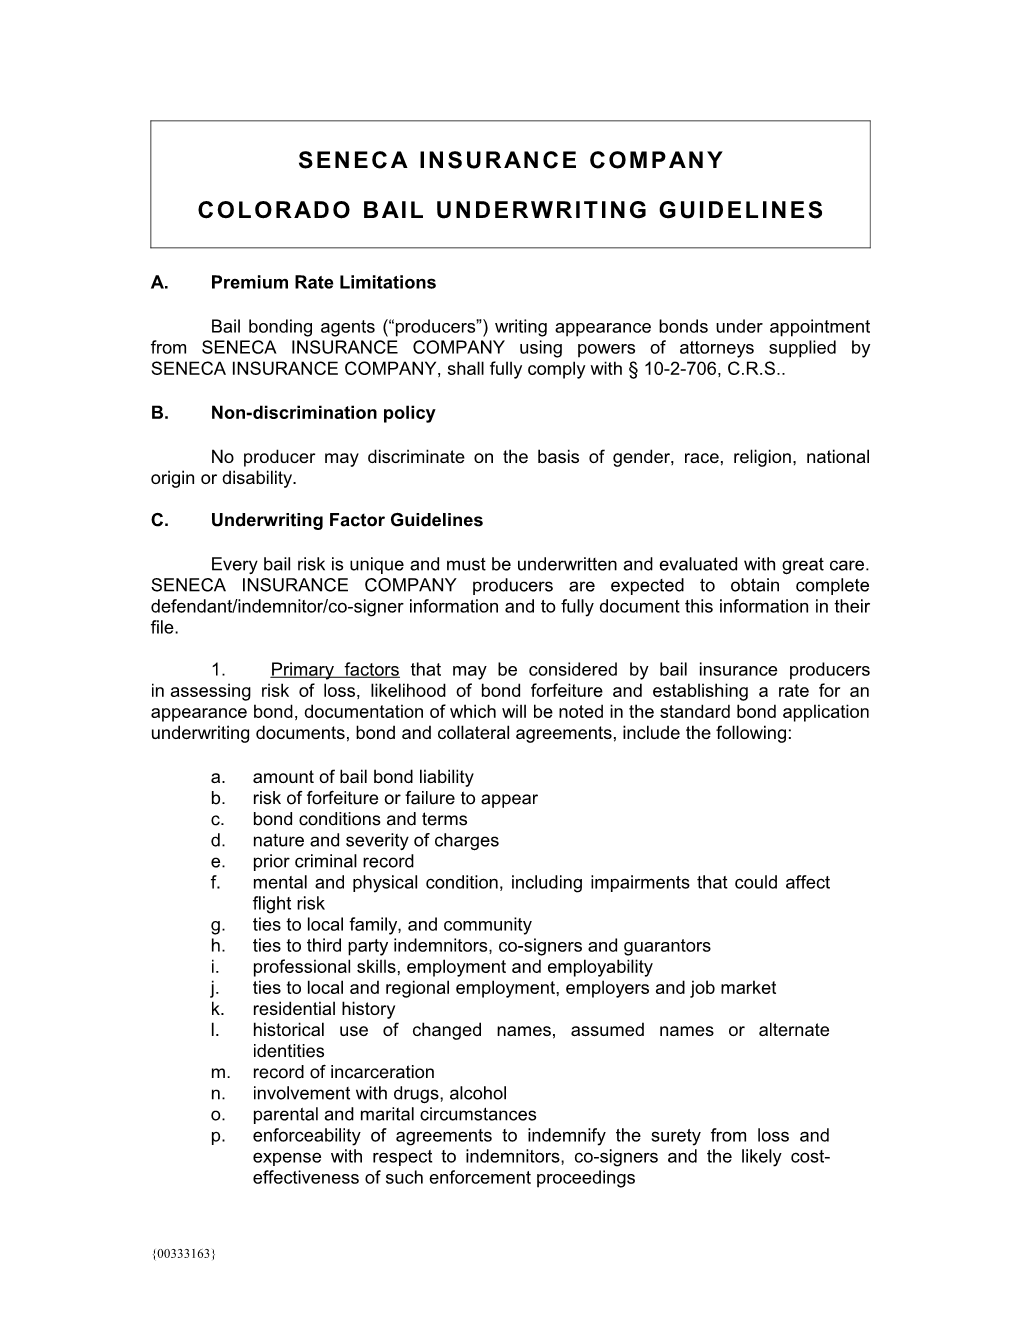 Consensus Form 8 Underwriting Guidelines (00333163-4)